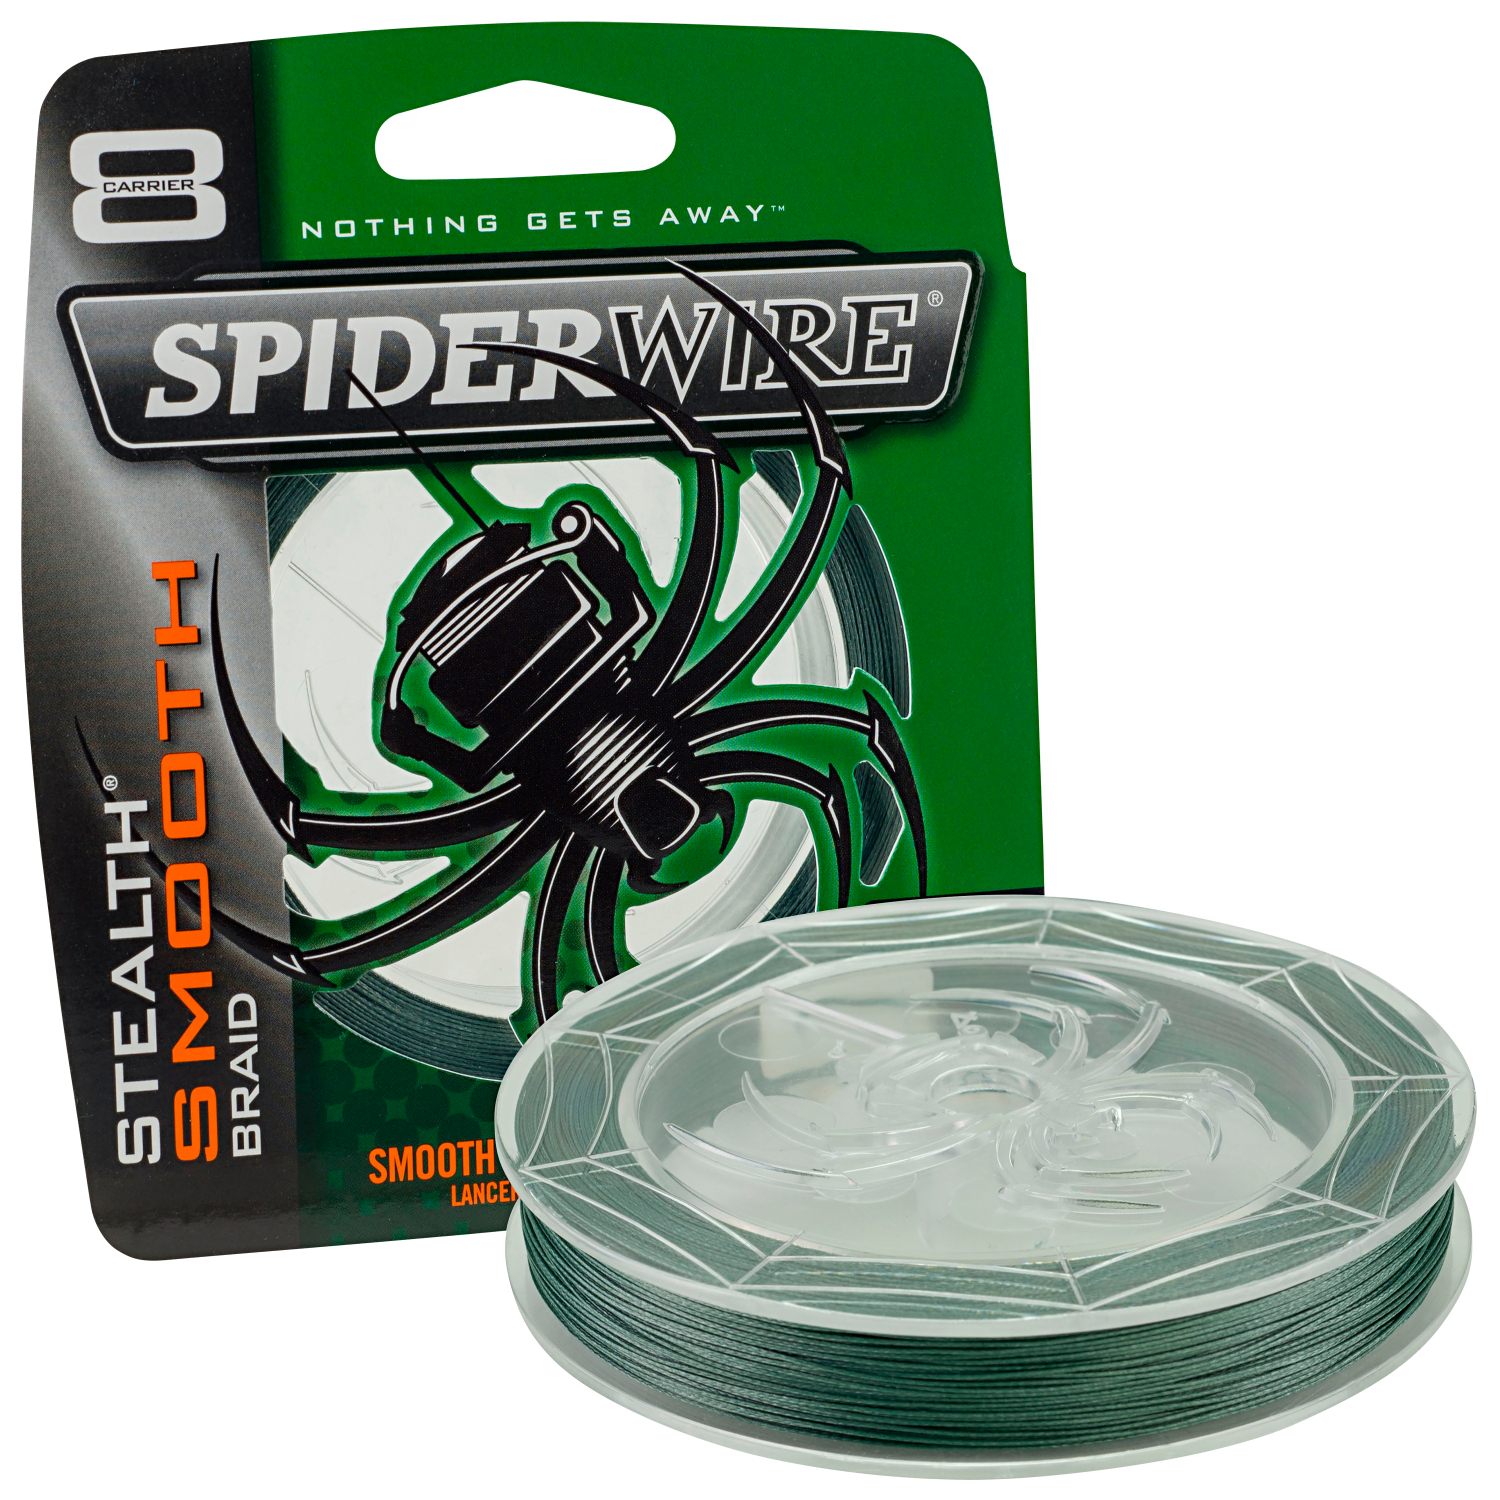 Spiderwire Spiderwire Fishing Line Stealth Smooth 8 (Moss Green, 150 m) 